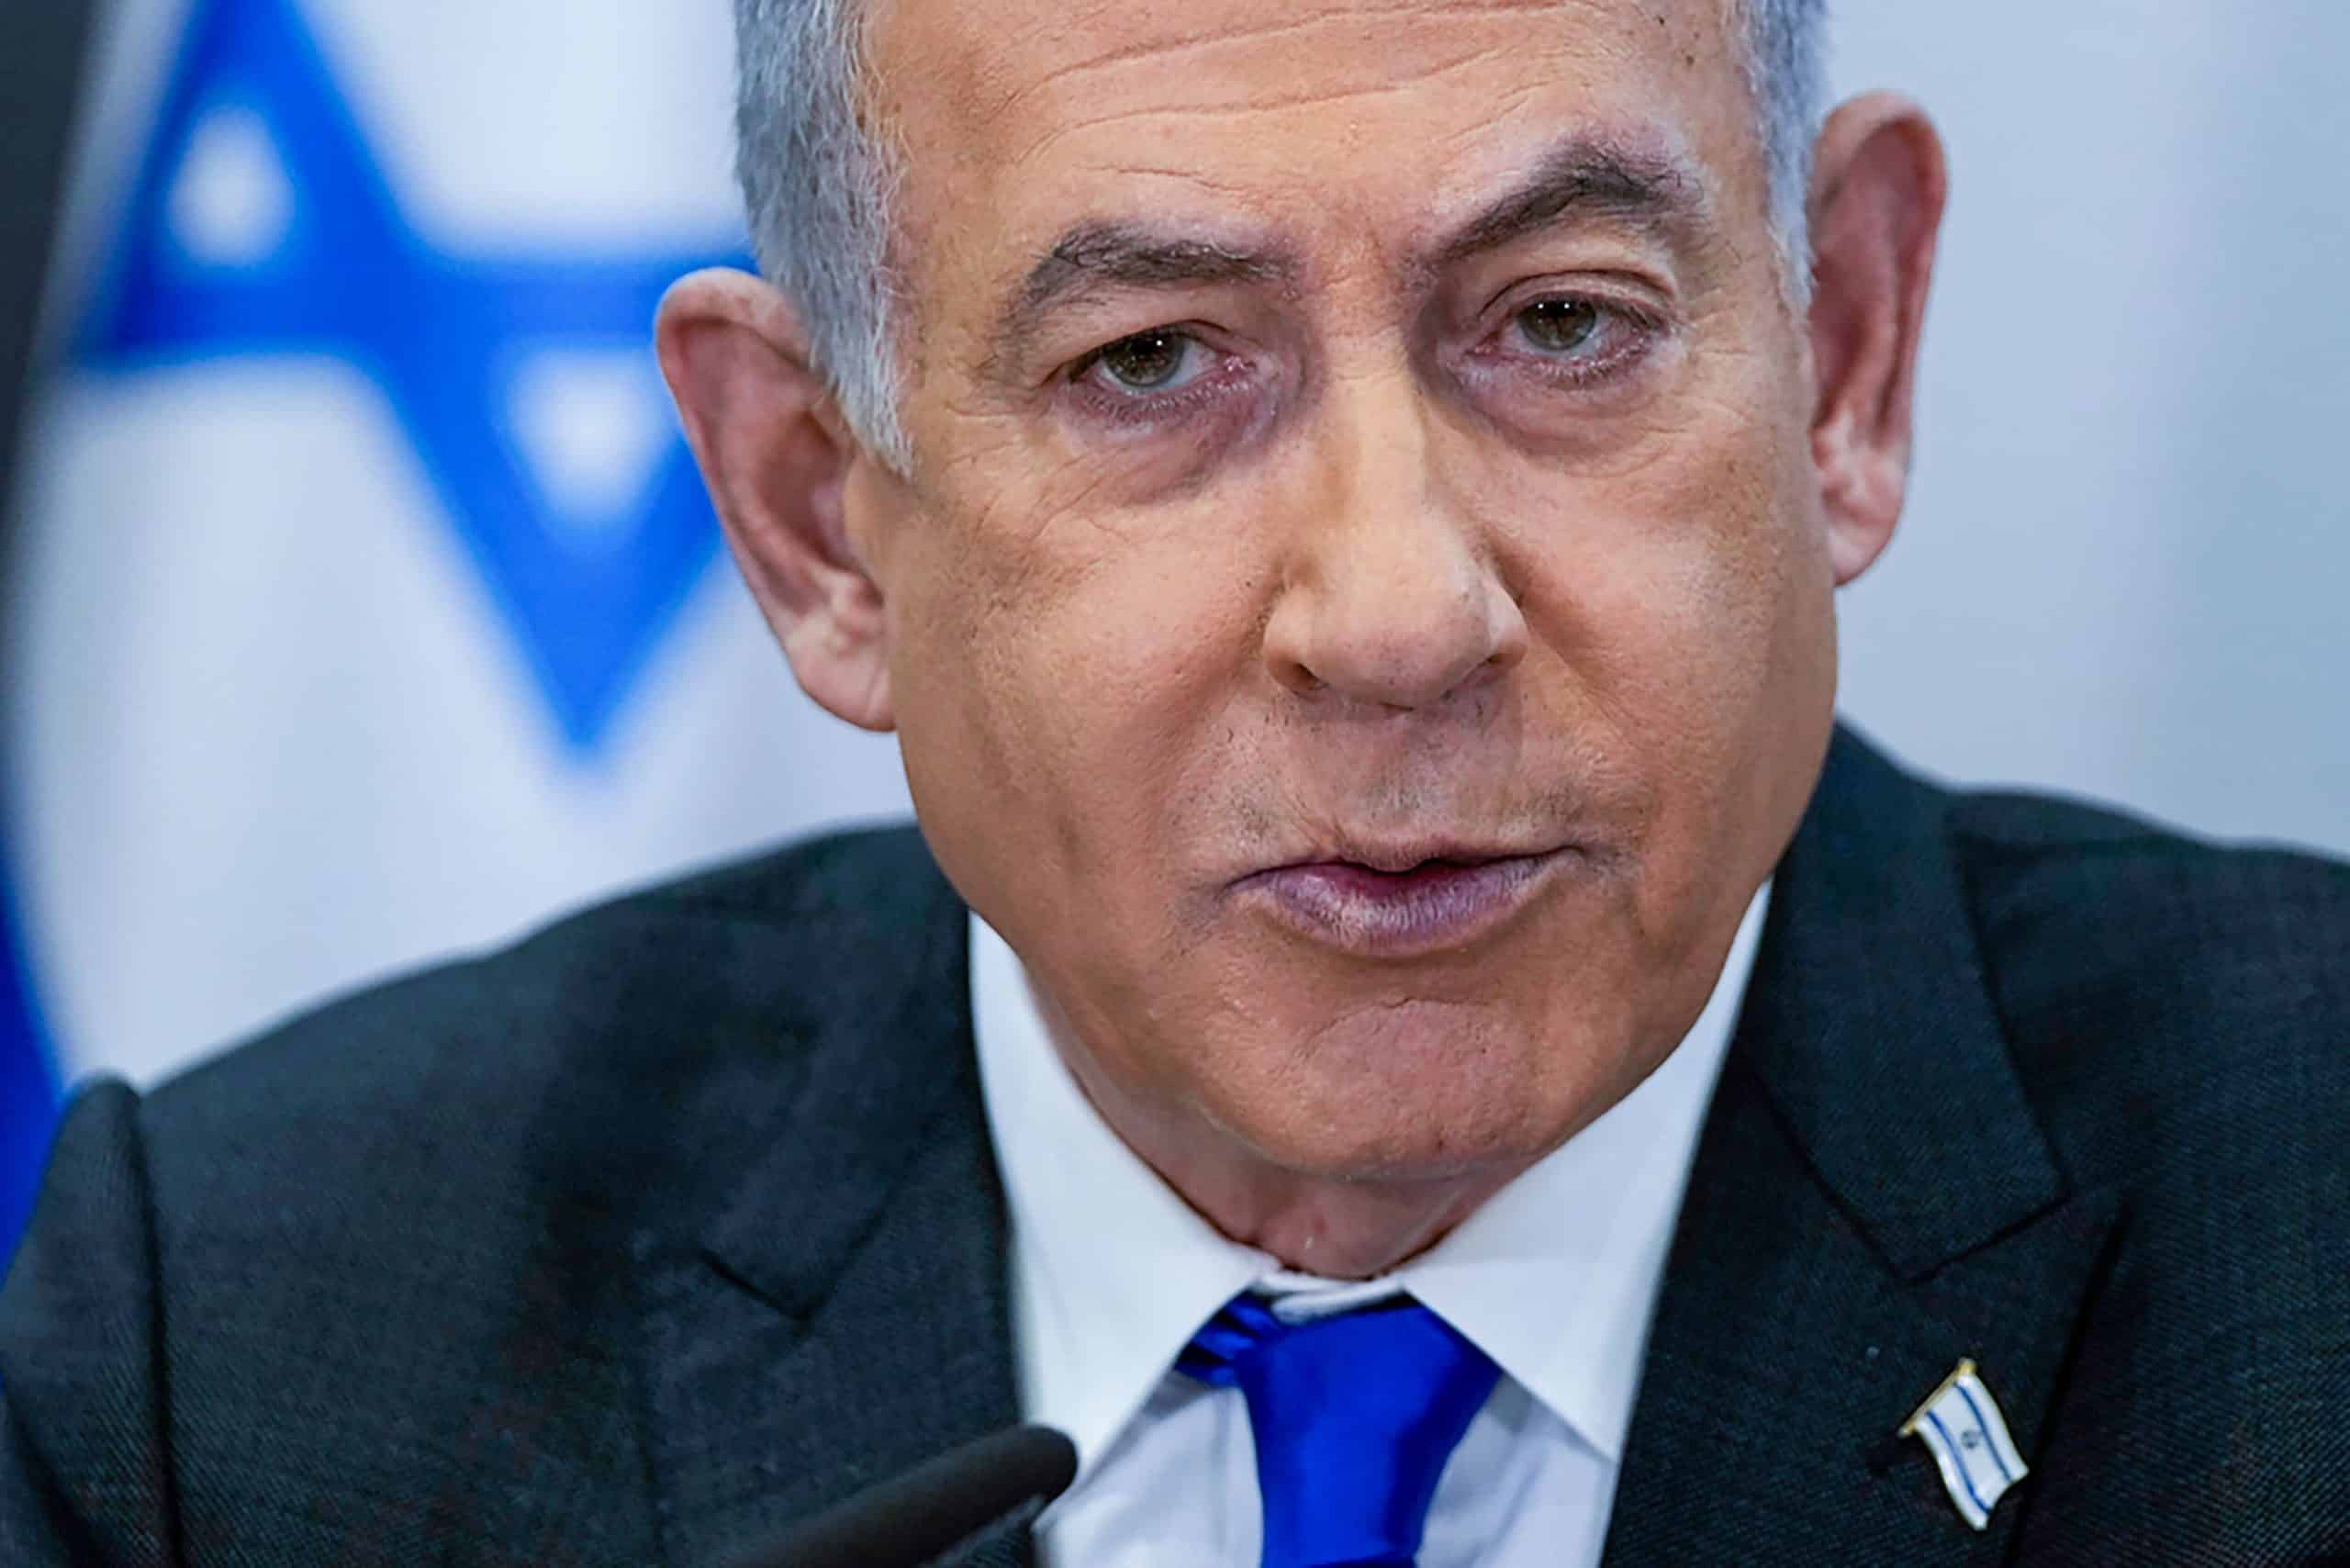 Netanyahu says Israel ‘will stand alone’ if it has to after US threat over arms